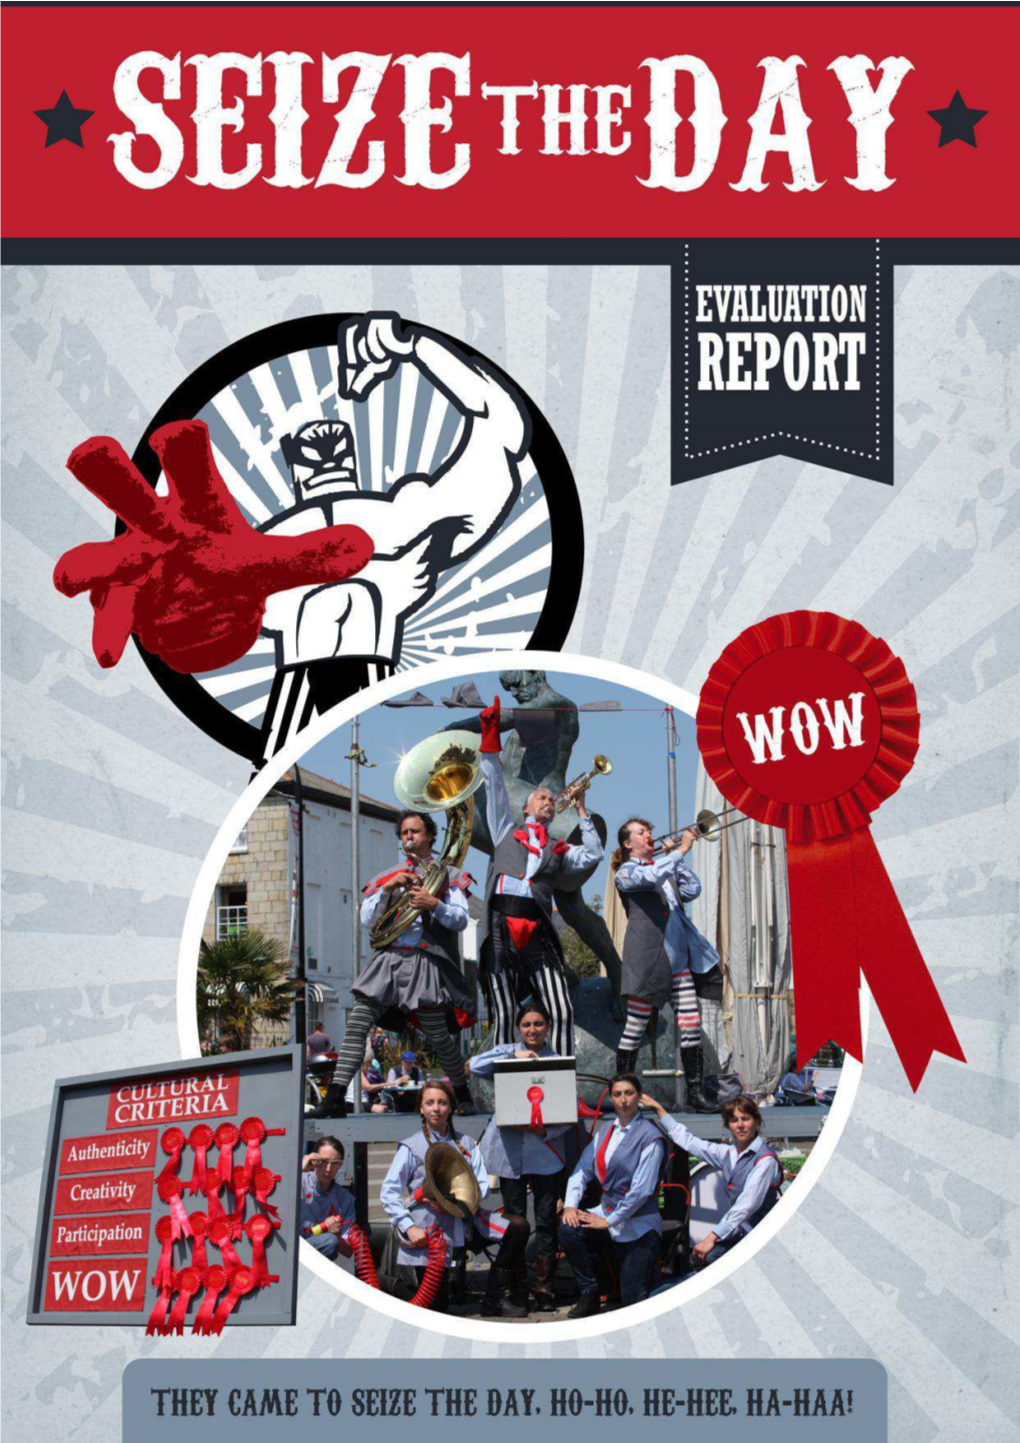 Seize-The-Day-Evaluation-Report.Pdf